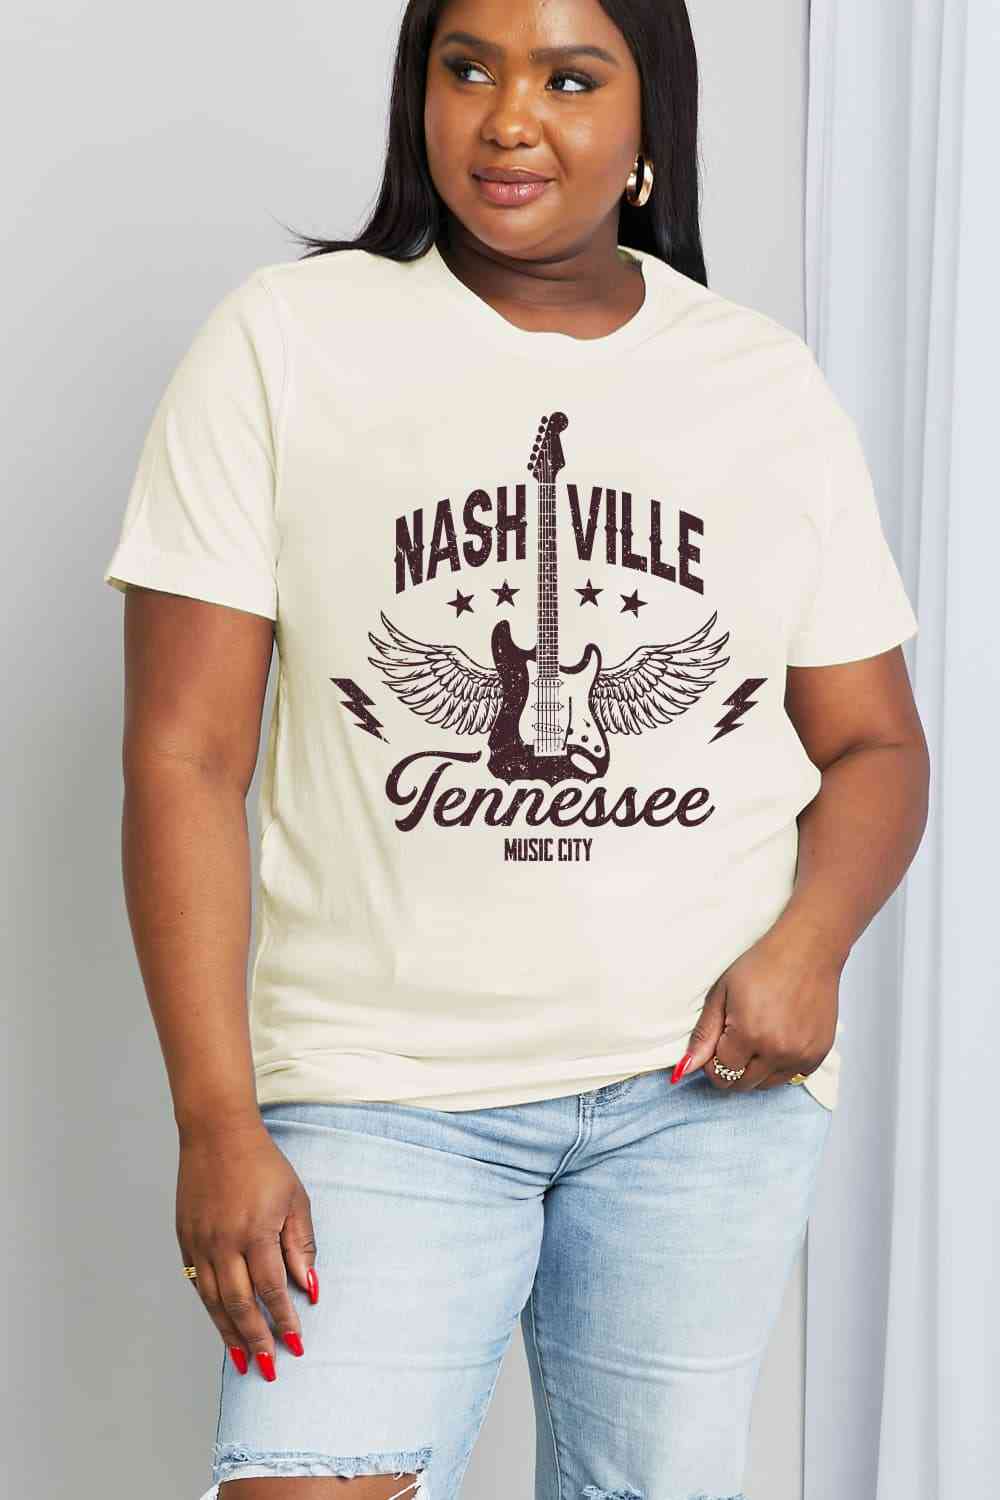 NASHVILLE TENNESSEE MUSIC CITY Graphic Cotton Tee - T-Shirts - Shirts & Tops - 4 - 2024